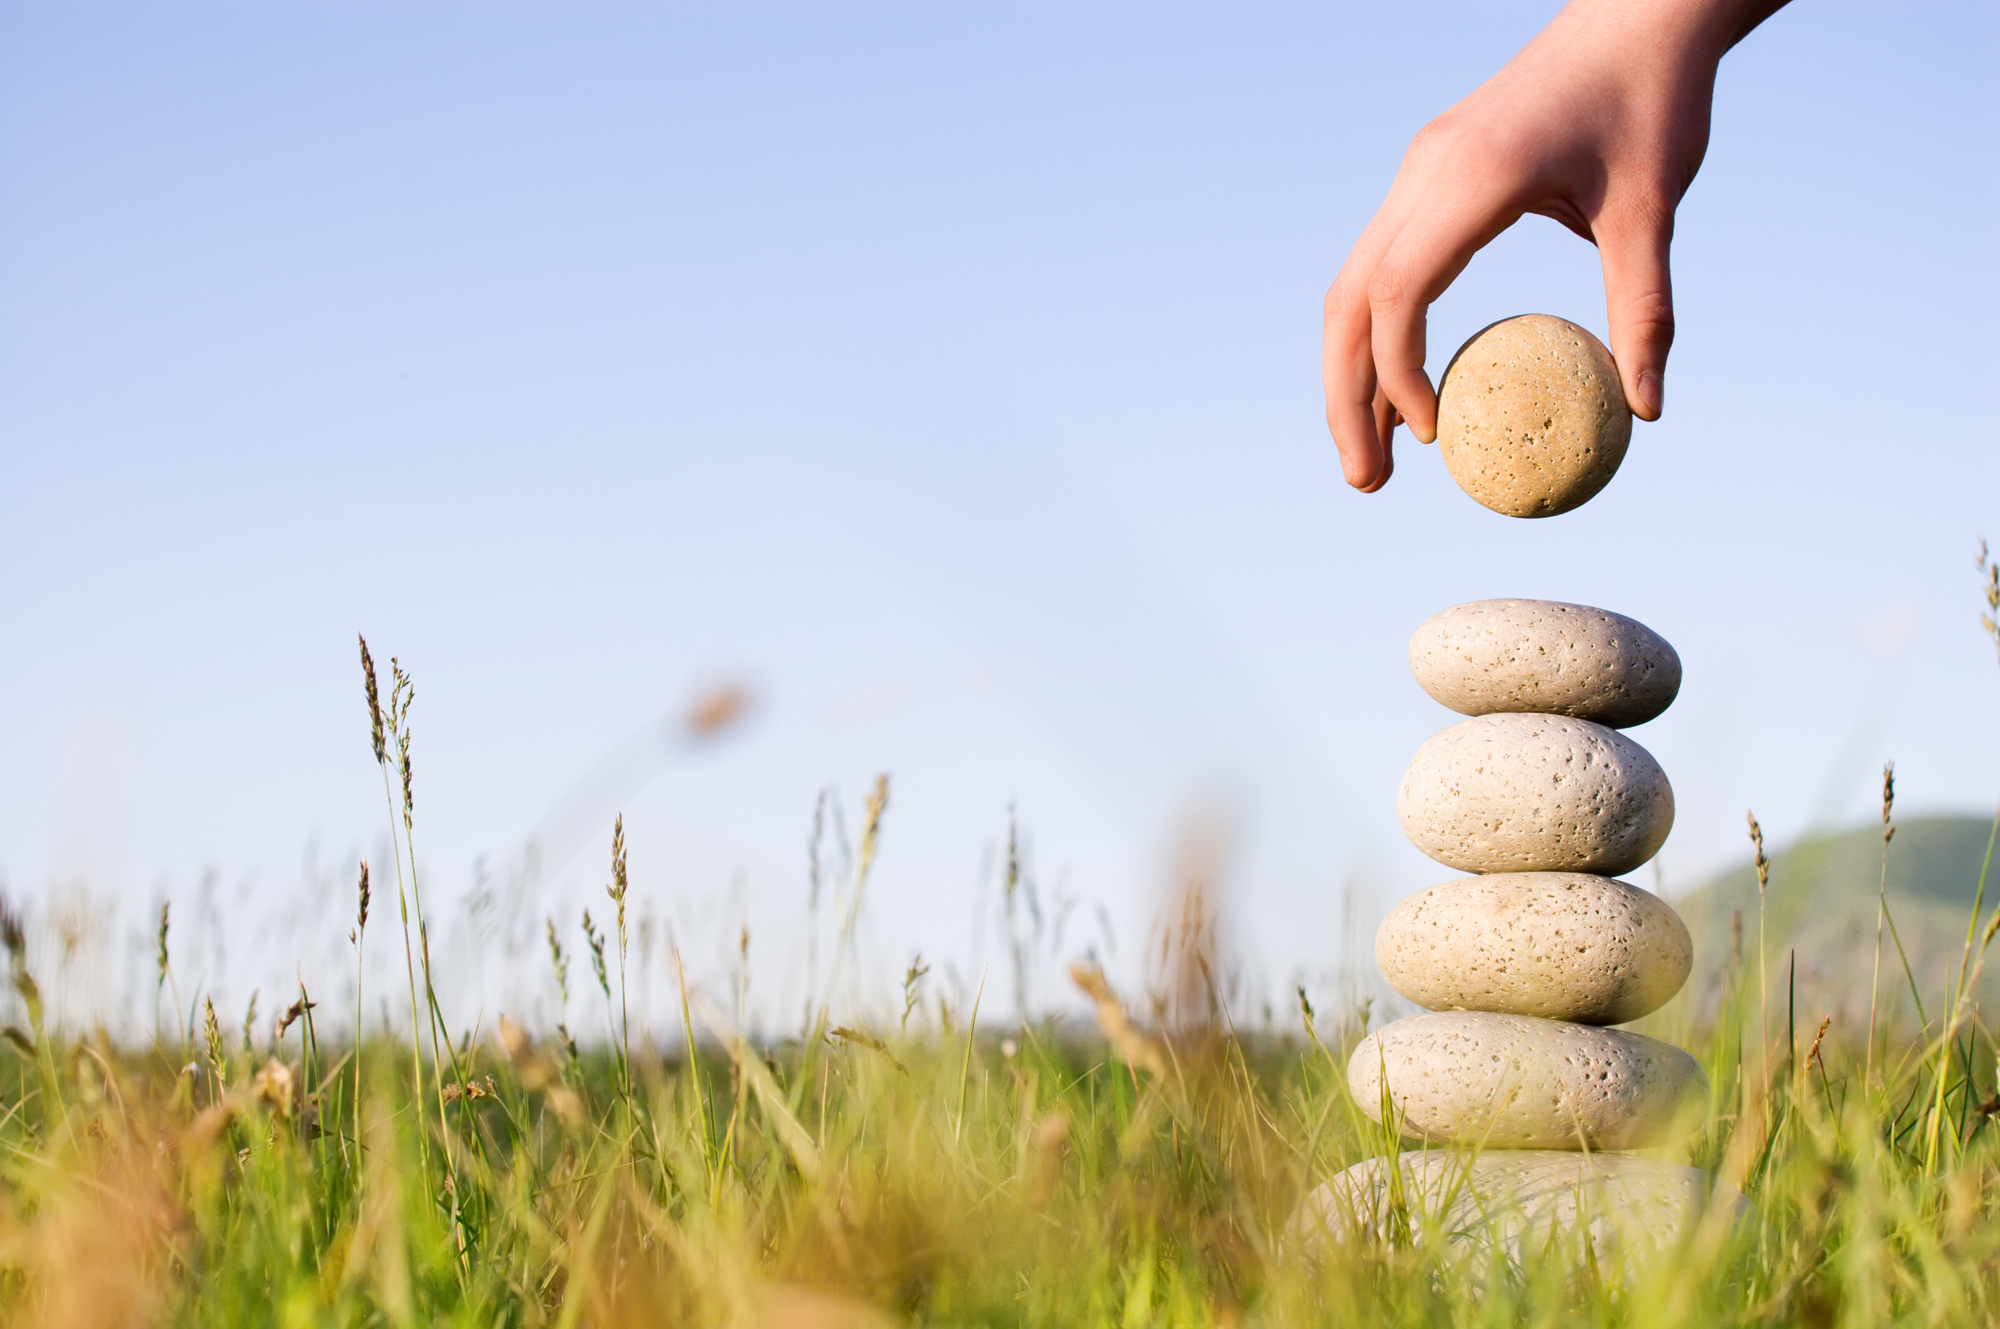 hand placing a stone on a pile of balanced stones